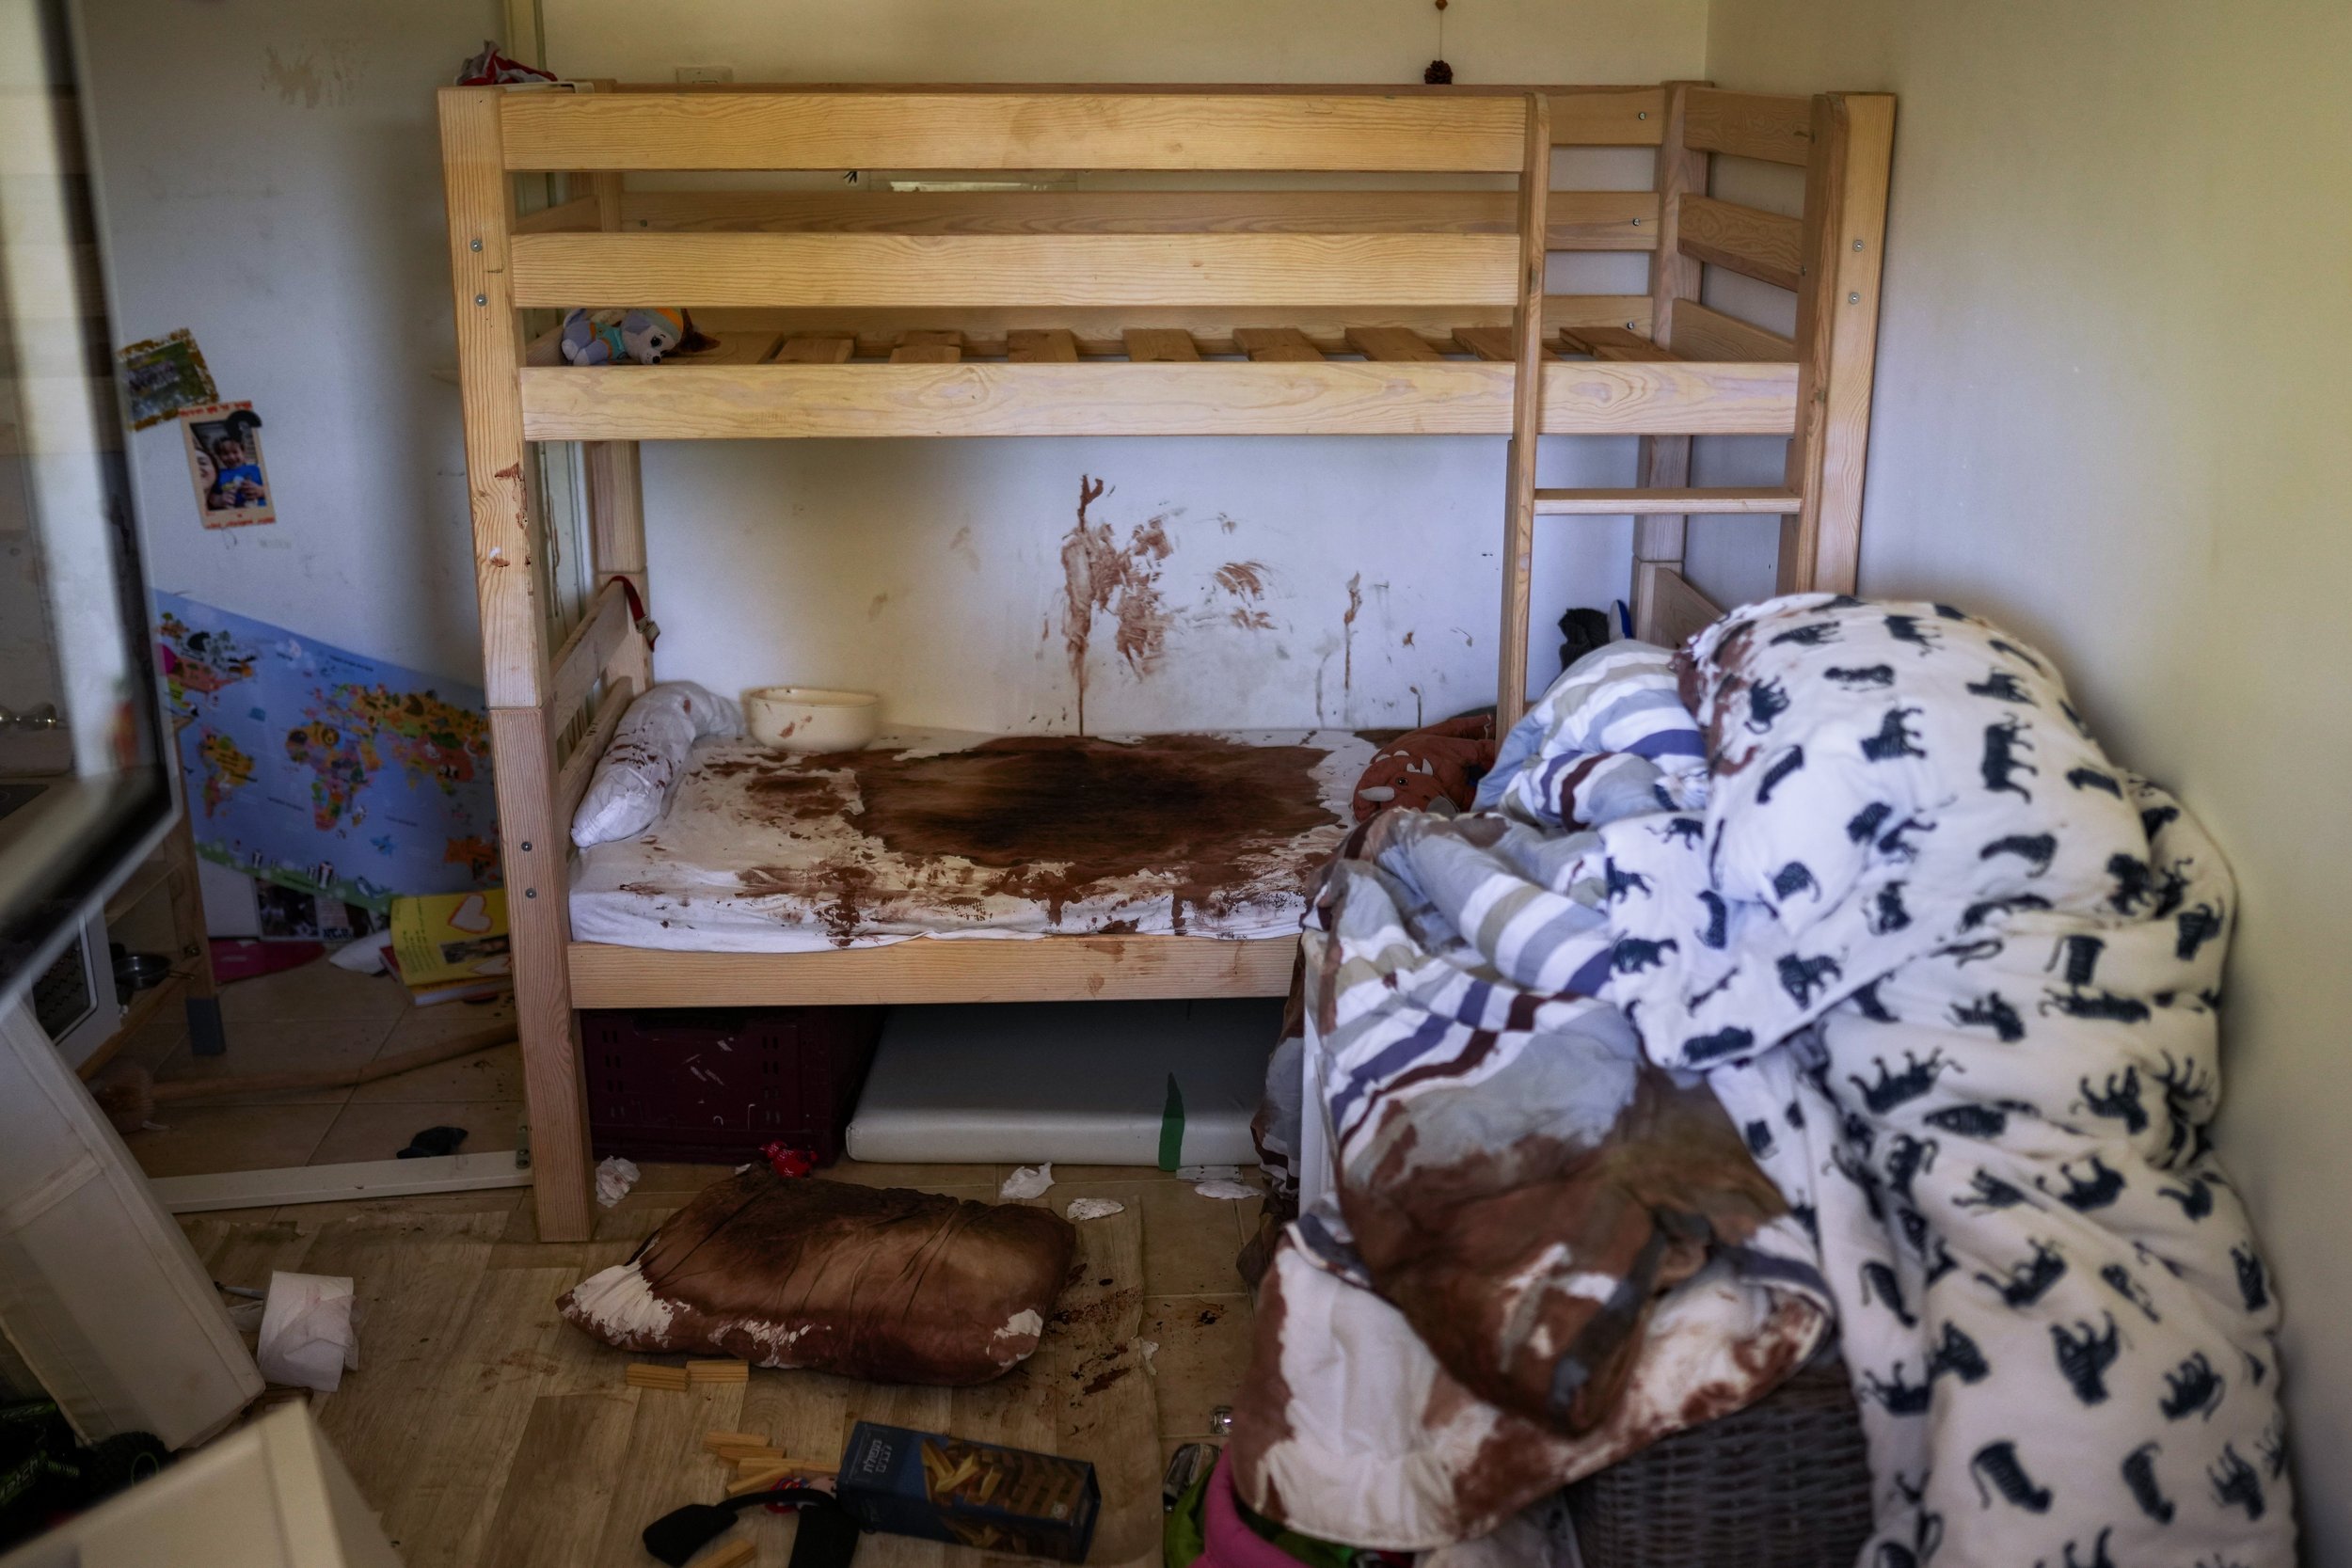  EDS NOTE: GRAPHIC CONTENT - Blood is splattered in a child's room following the Oct. 7 massacre by Hamas militants in Kibbutz Nir Oz, Israel, as seen on Oct. 19, 2023. Nir Oz is one of more than 20 towns and villages in southern Israel that were amb